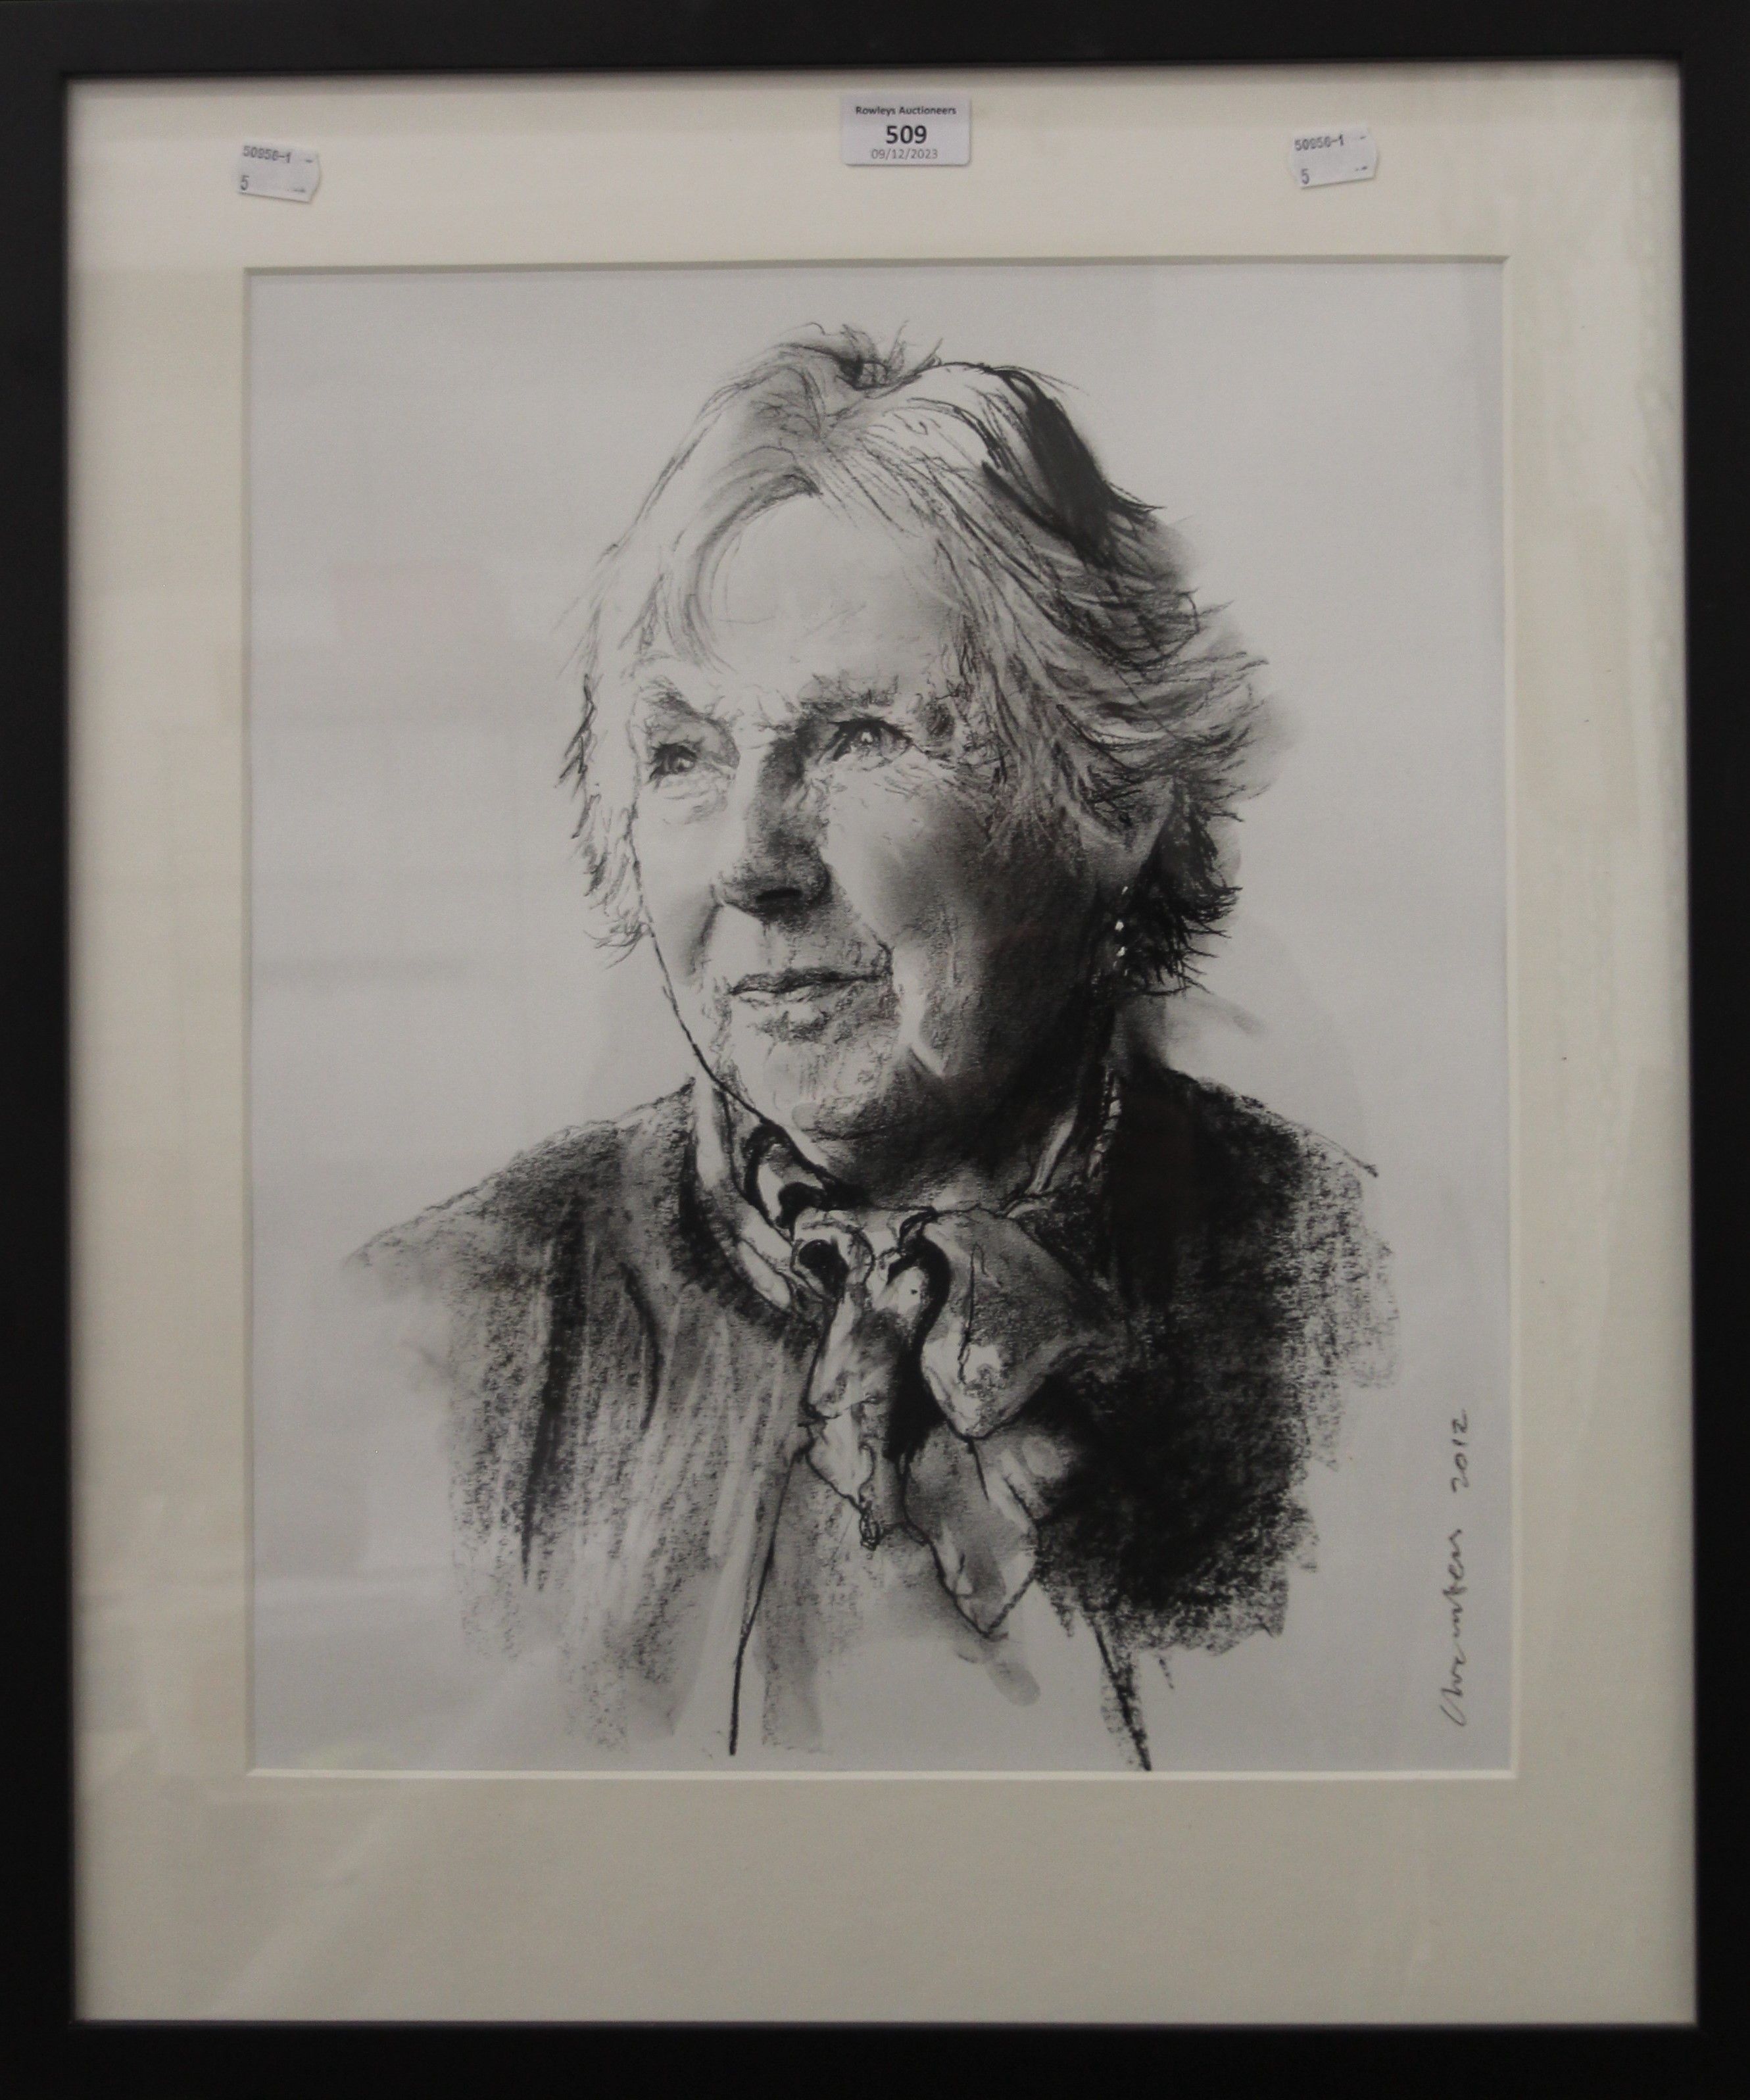 DEREK CHAMBERS, A Portrait of Jean Bartleet, charcoal, signed and dated 2012, framed and glazed. 37. - Image 2 of 3